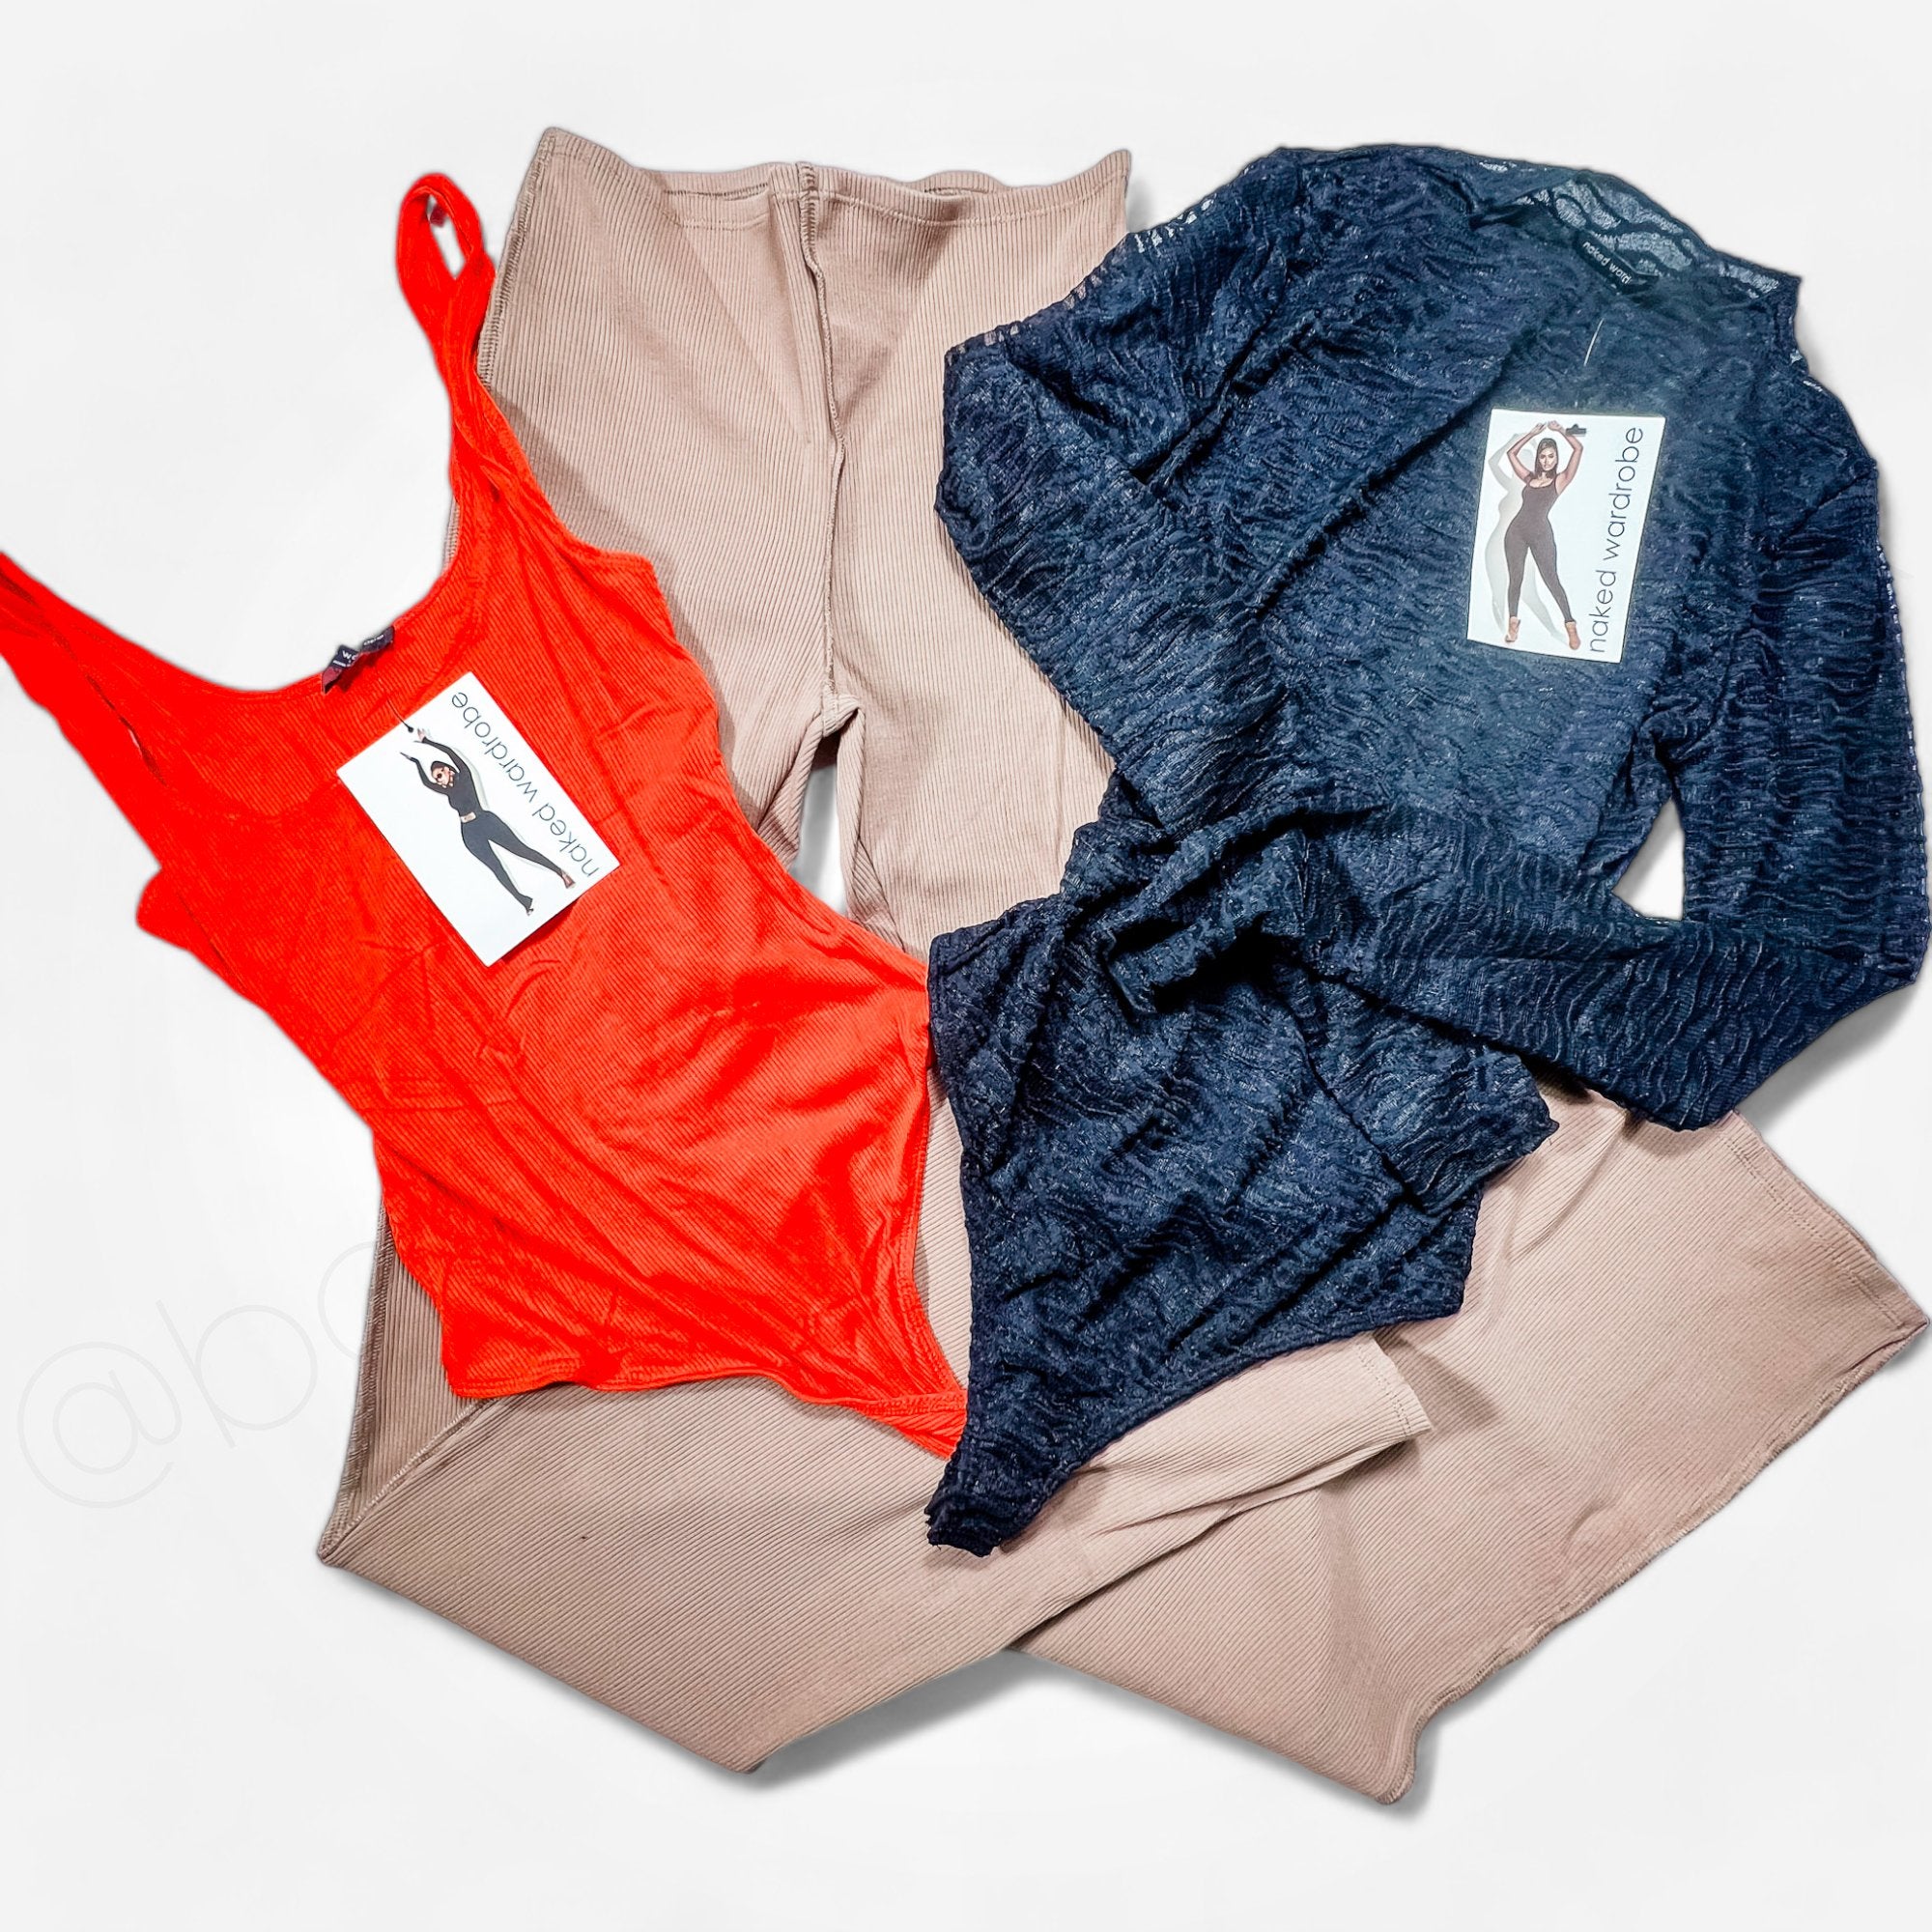 Naked Wardrobe Assorted Women's New Wholesale Clothing - Boutique by the Box Wholesale for Resellers